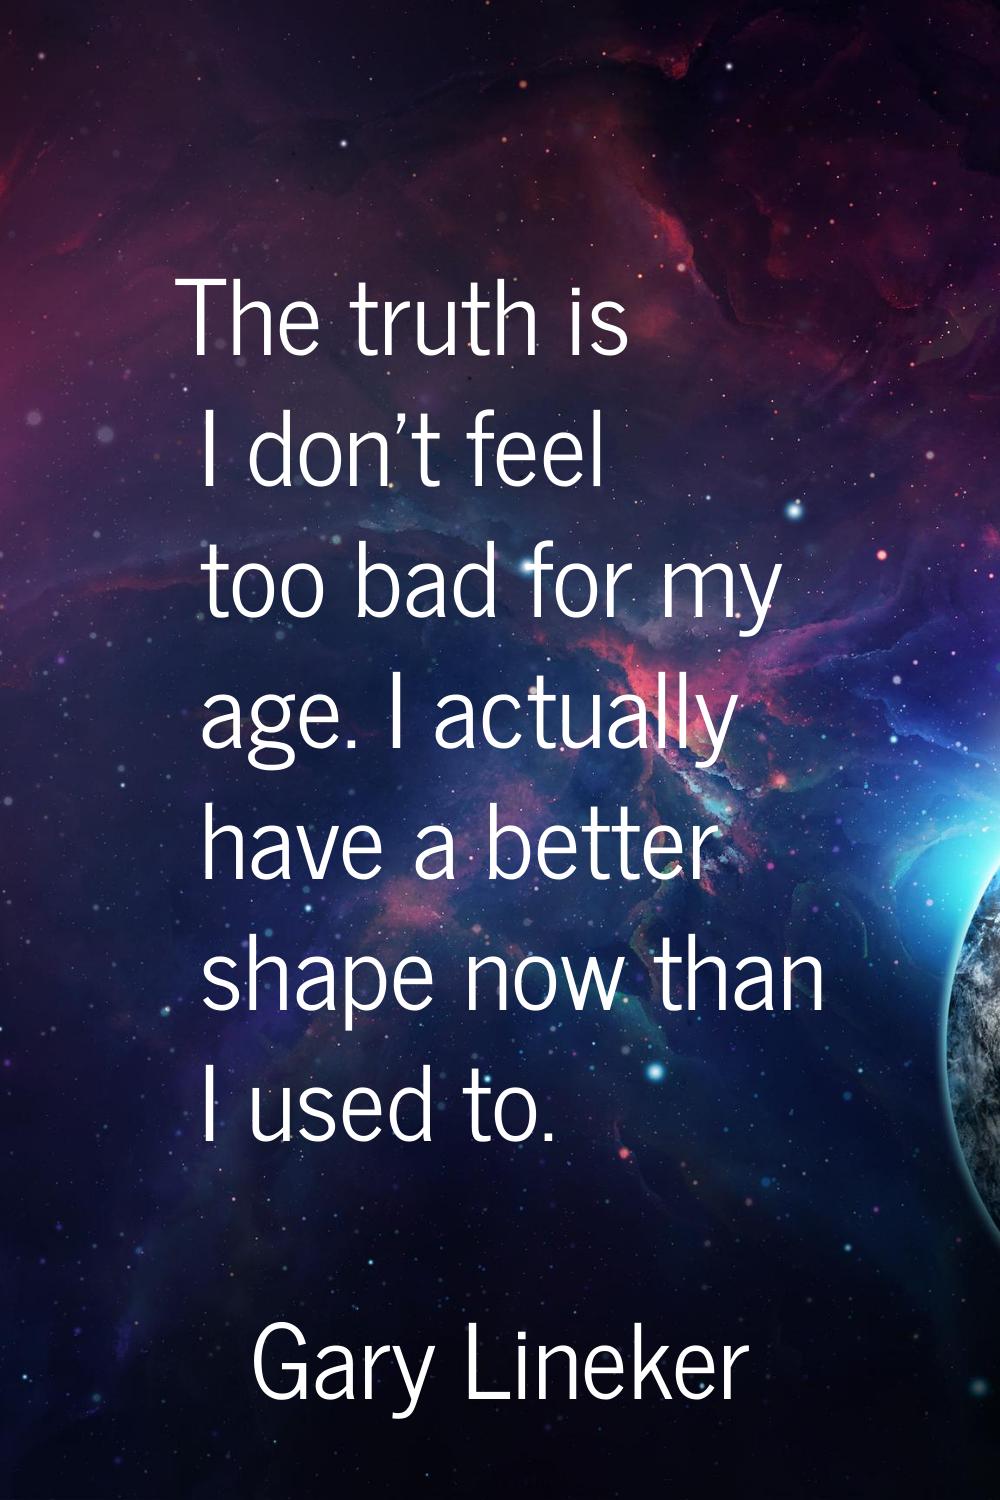 The truth is I don't feel too bad for my age. I actually have a better shape now than I used to.